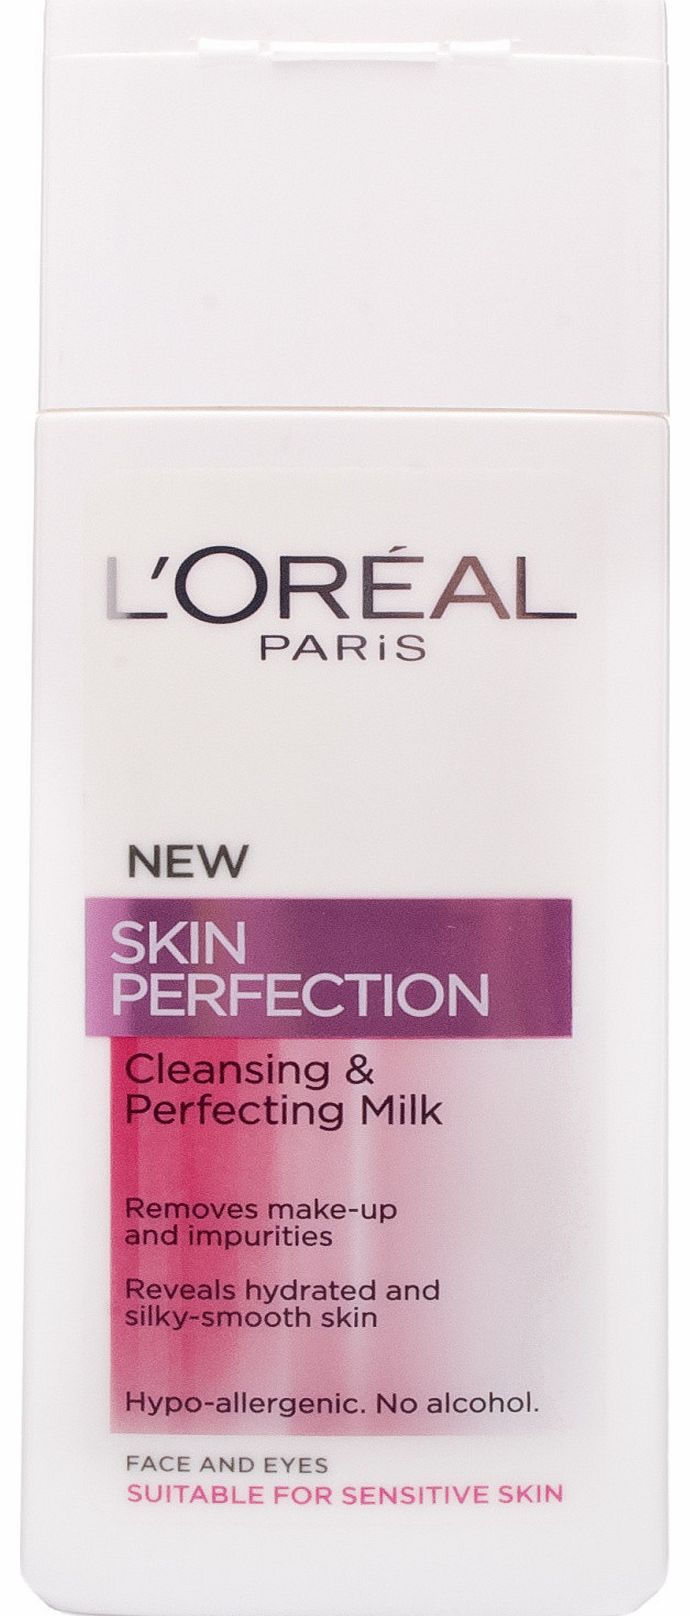 L'Oreal Skin Perfection Cleanser Dry/